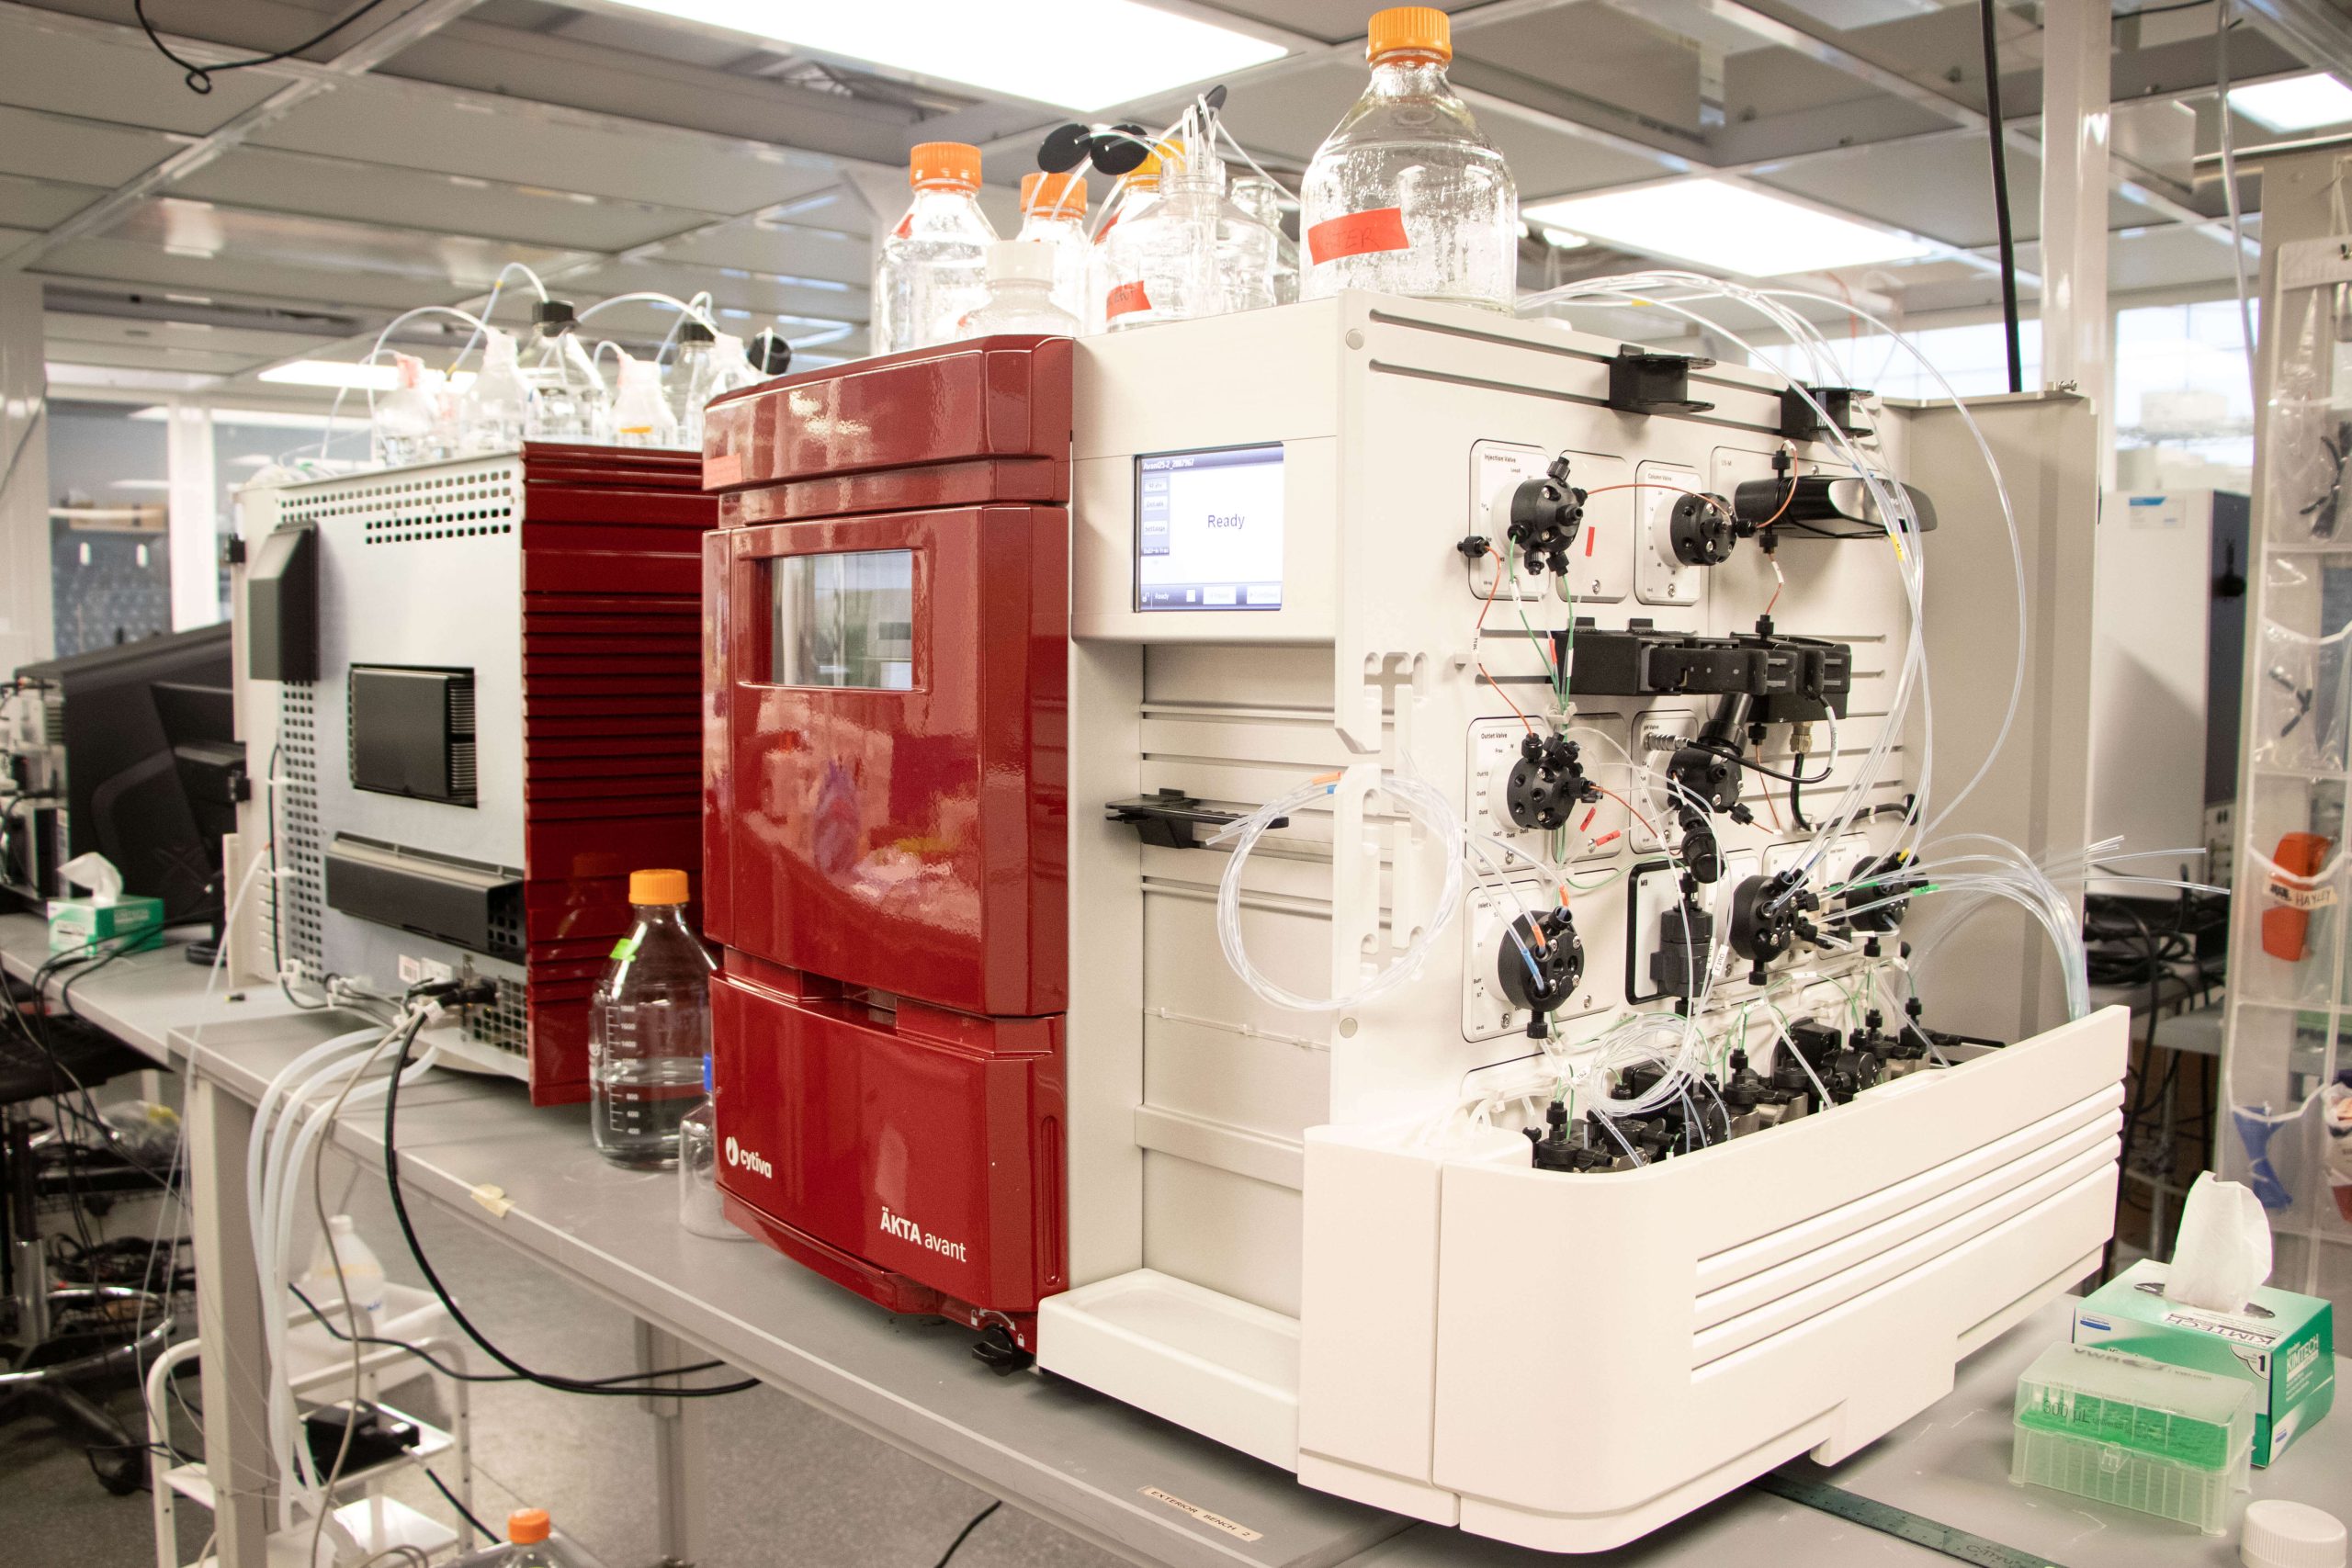 Picture of a laboratory, with a red machine in the center of a photo